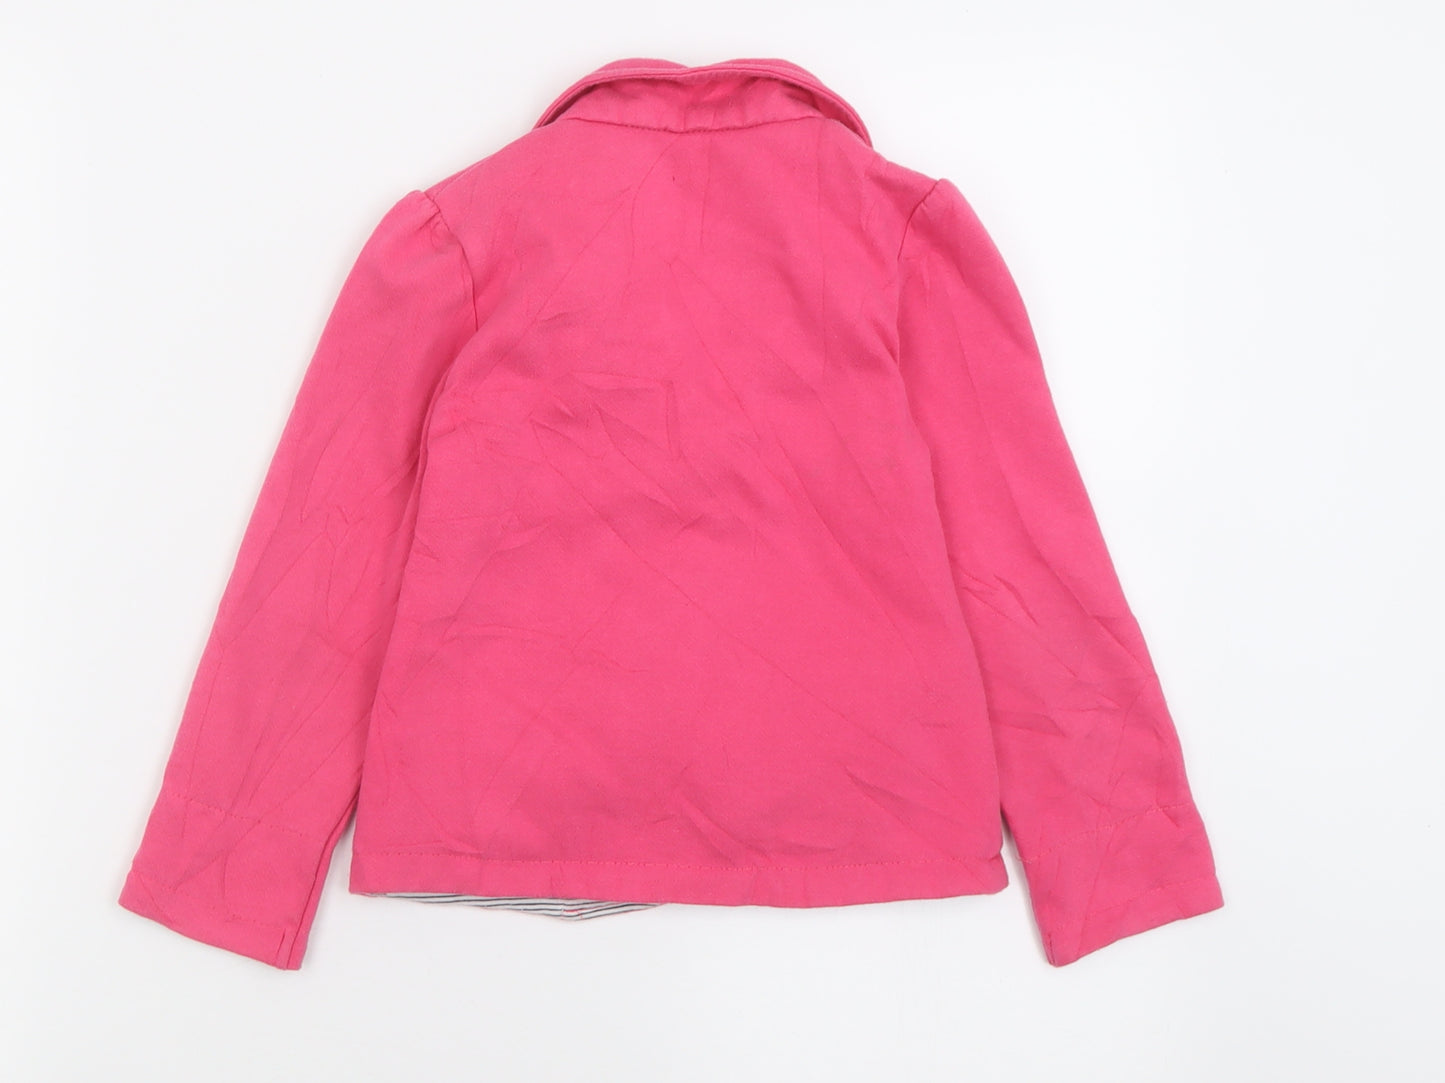 Young Dimension Girls Pink   Basic Jacket Jacket Size 4-5 Years  Button